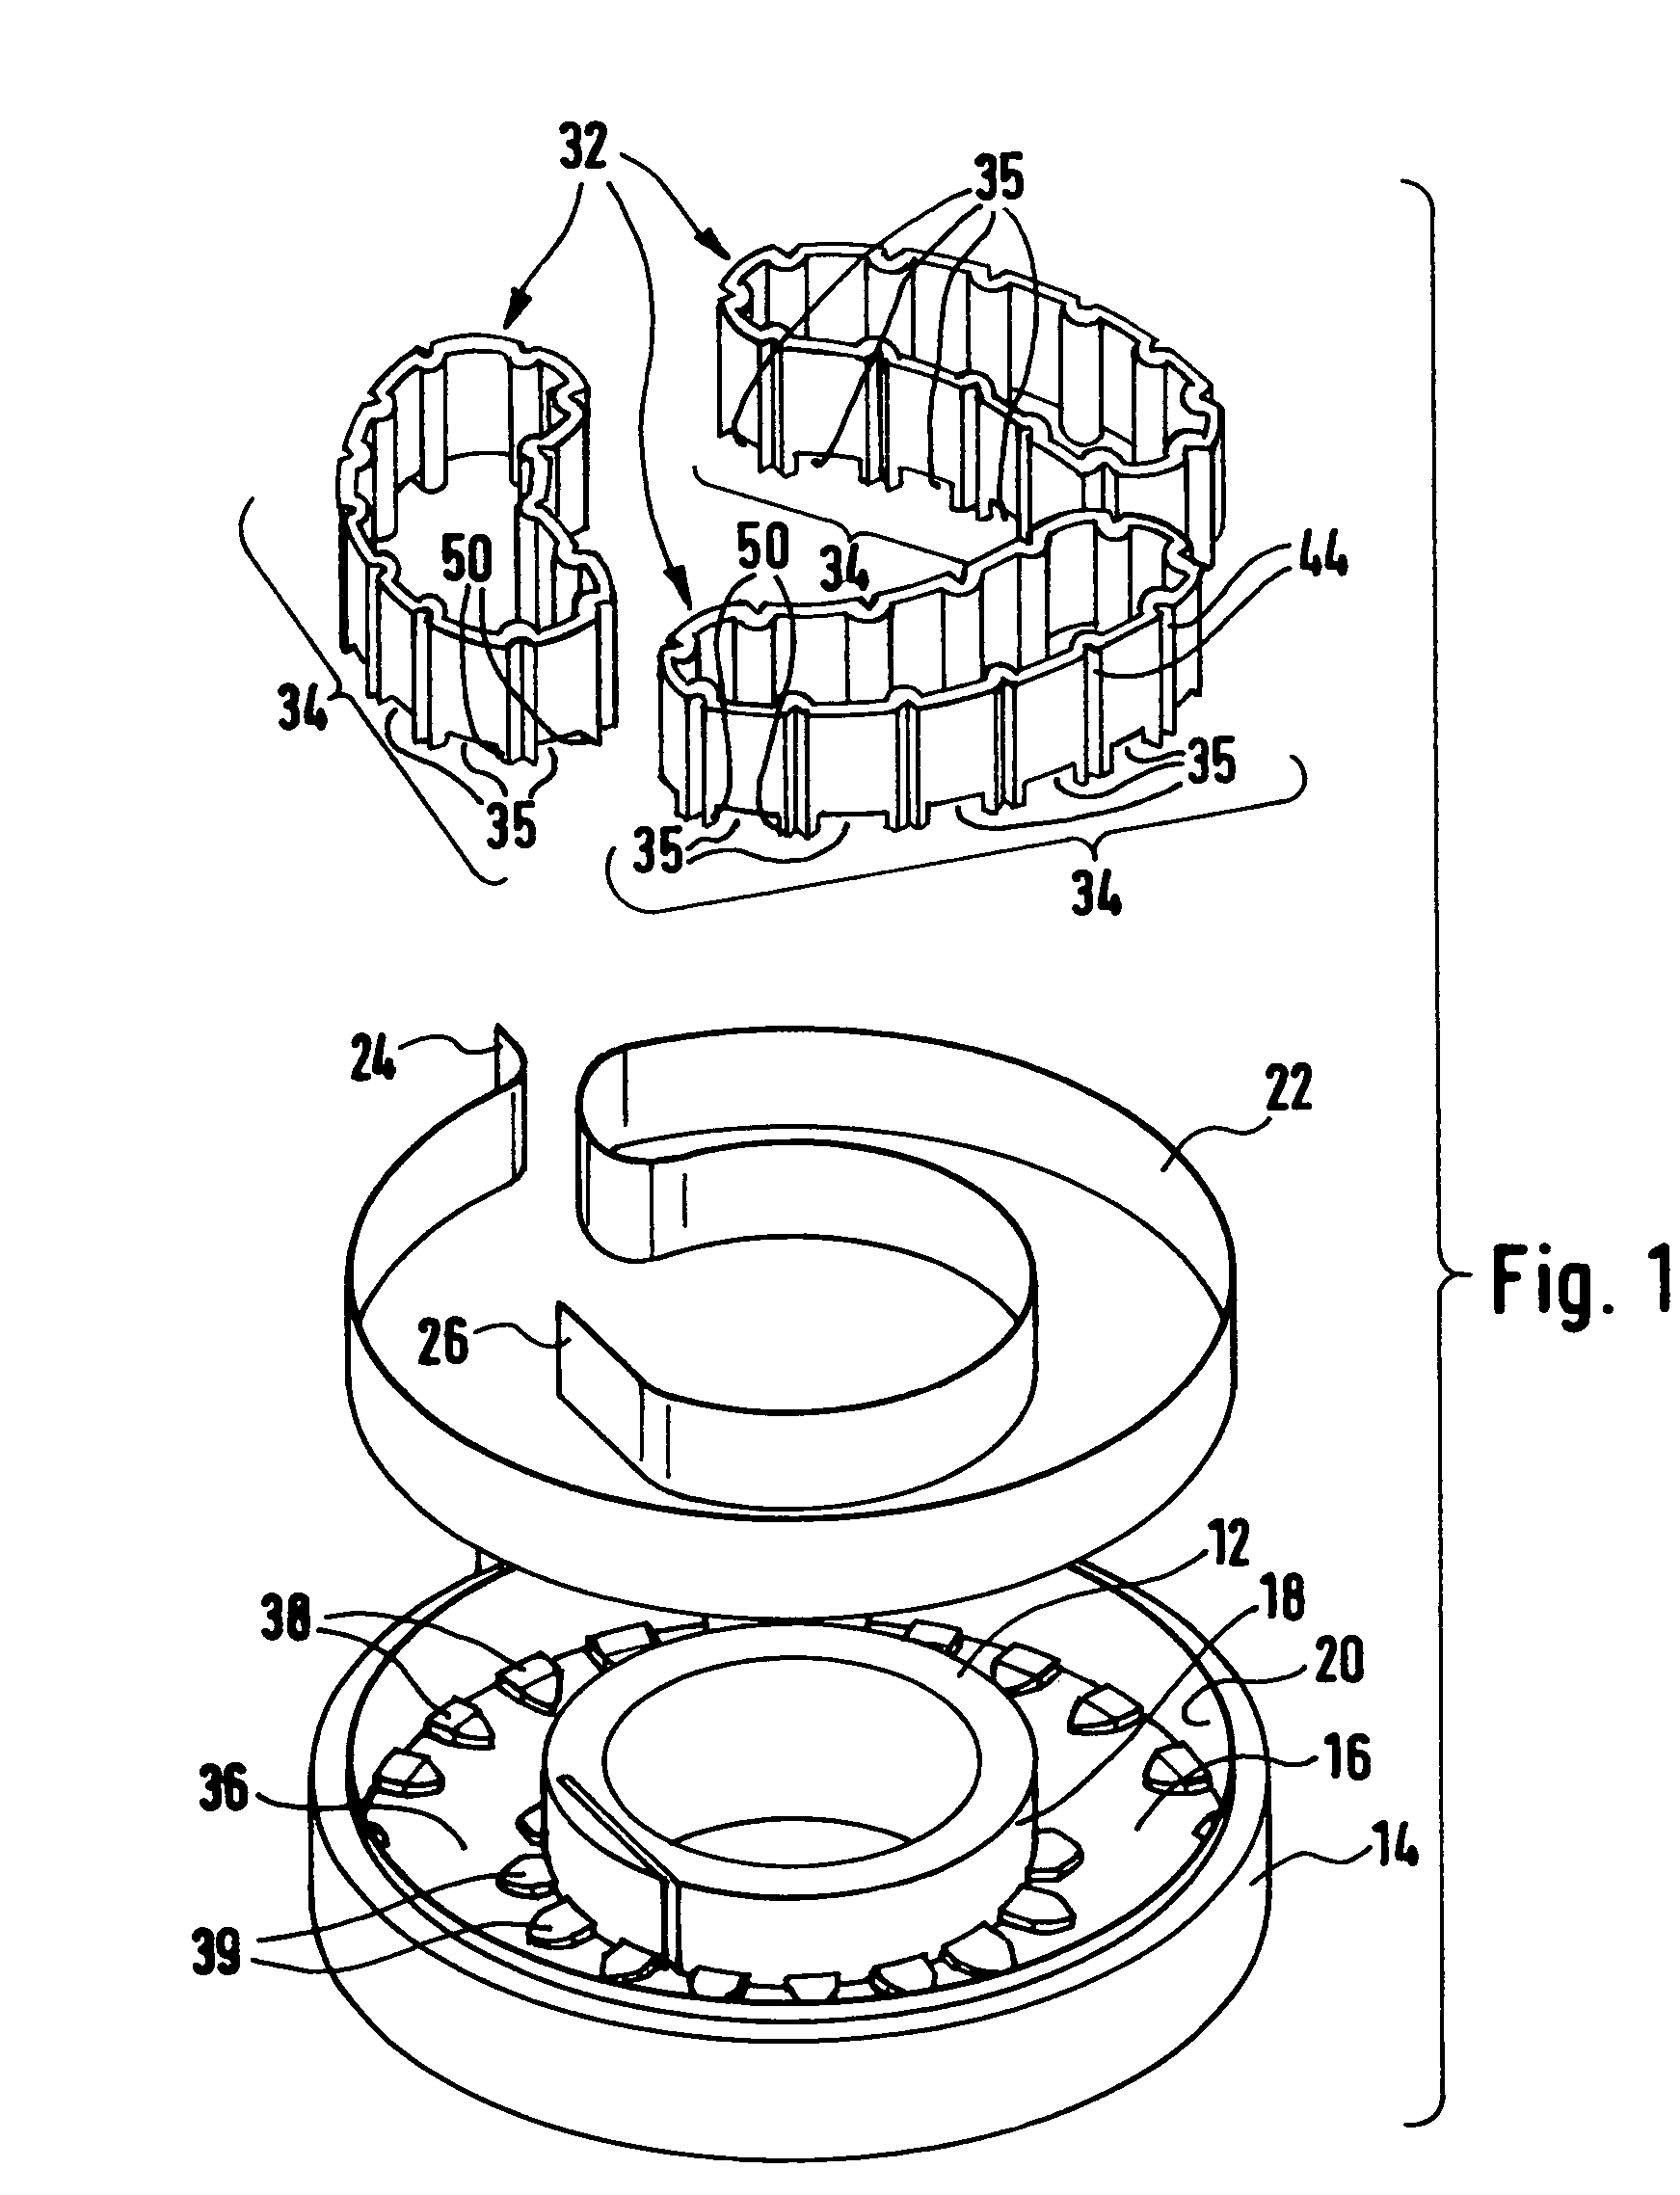 Transmission device for transmitting electrical signals between a rotor and a stator